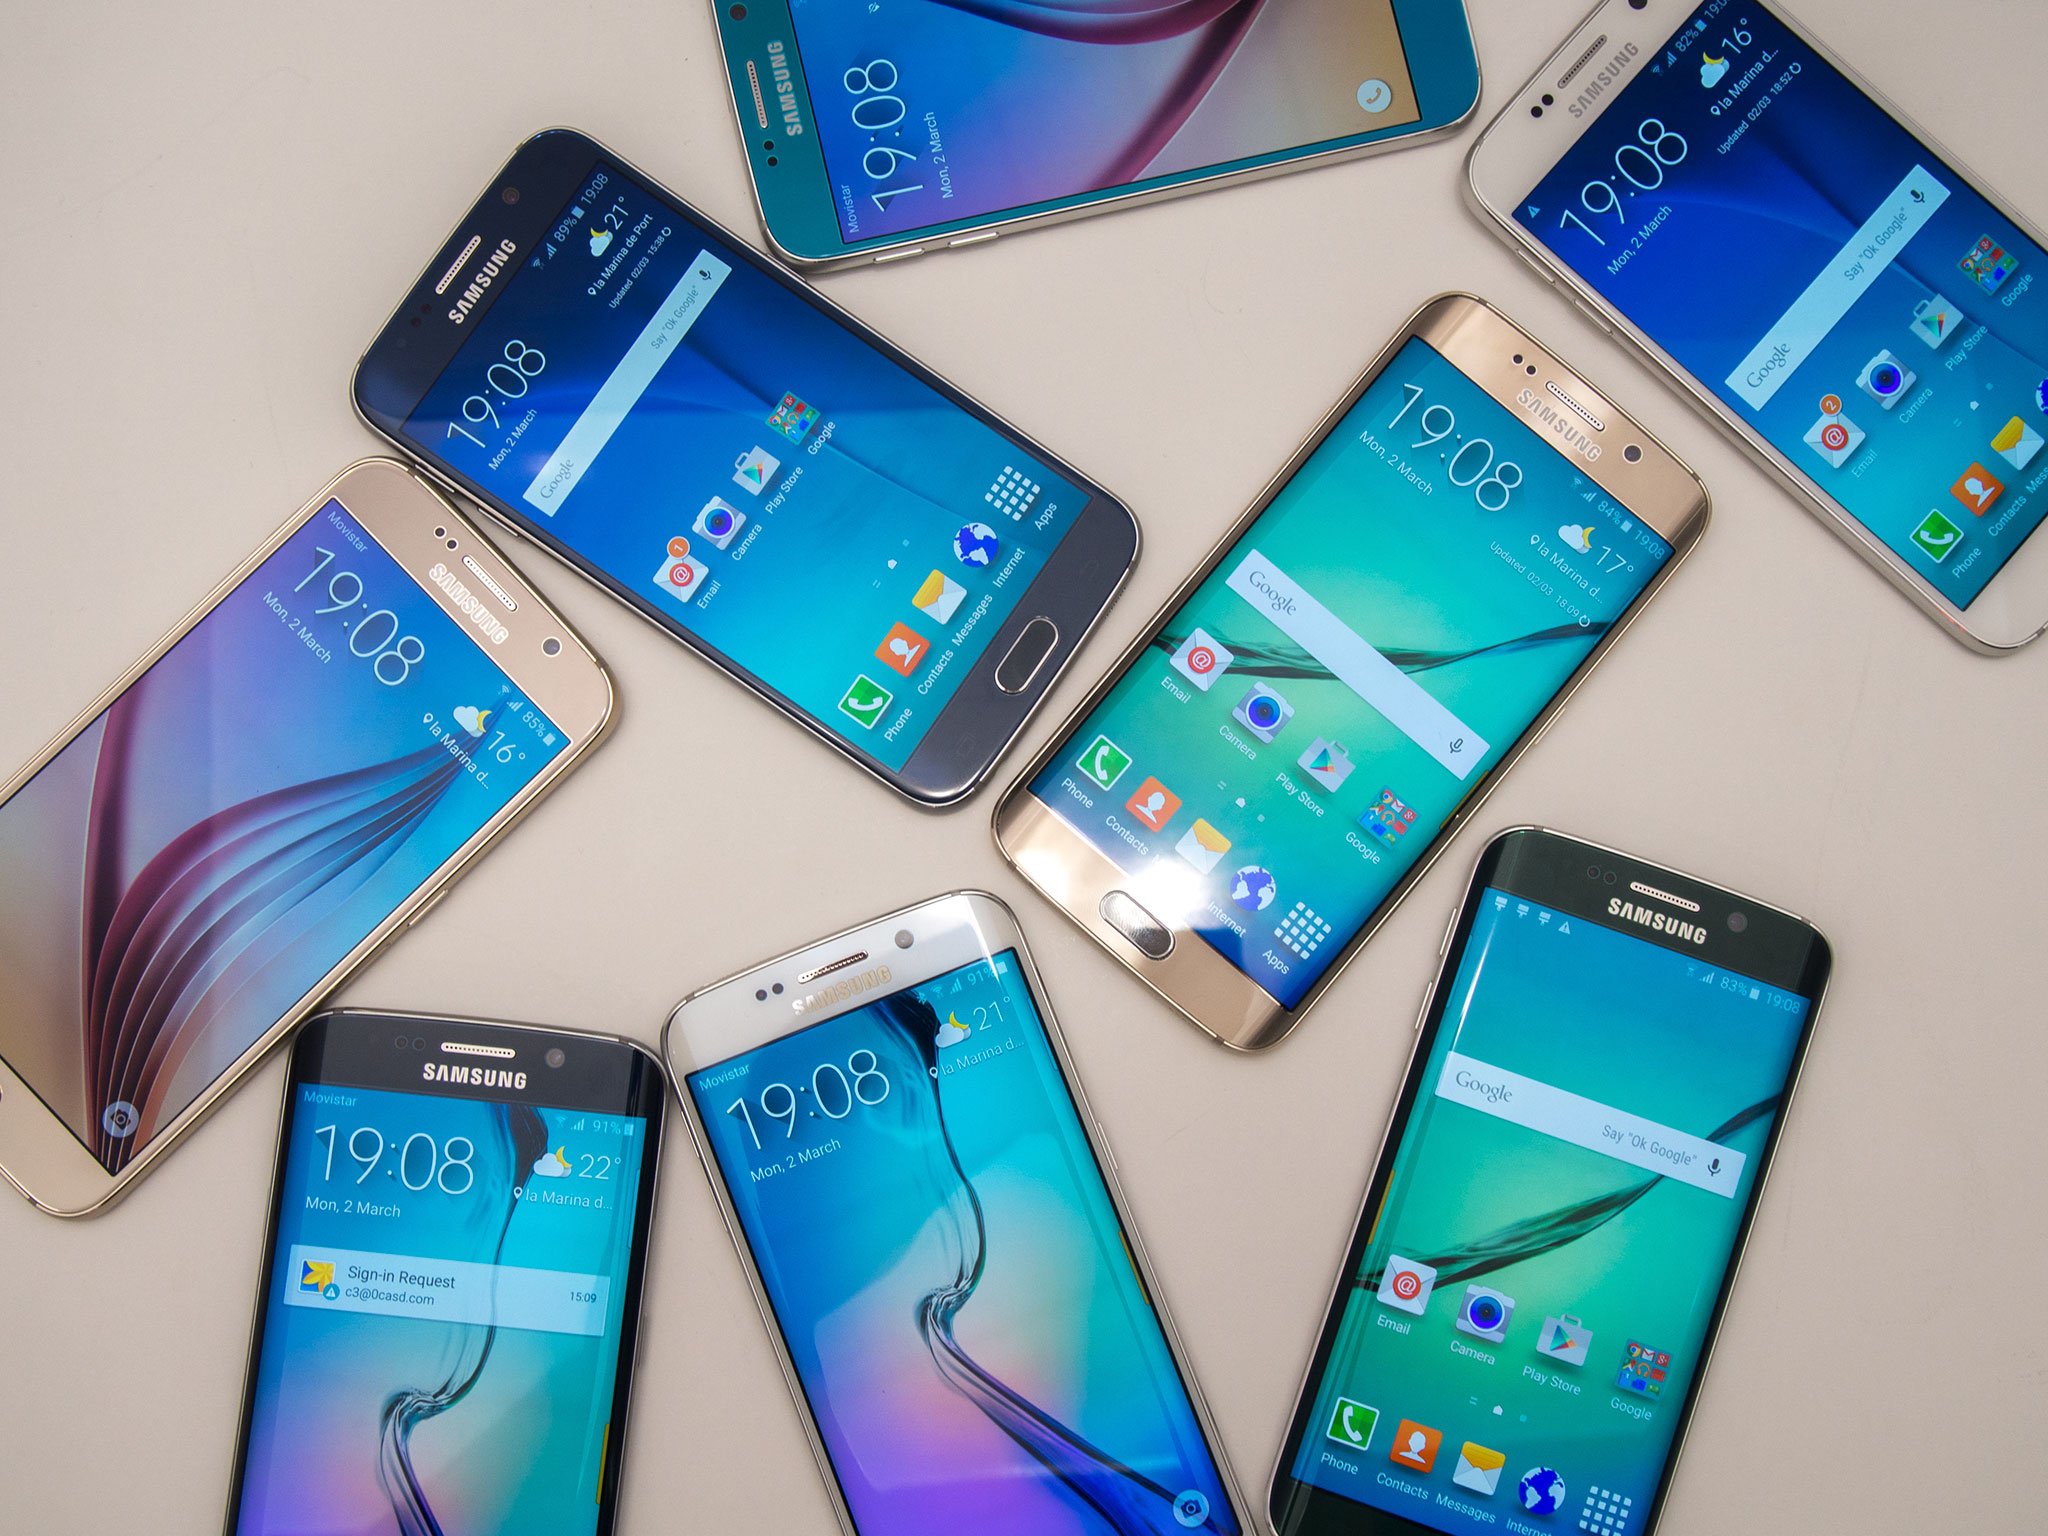 How to take a screenshot on the Samsung Galaxy S6